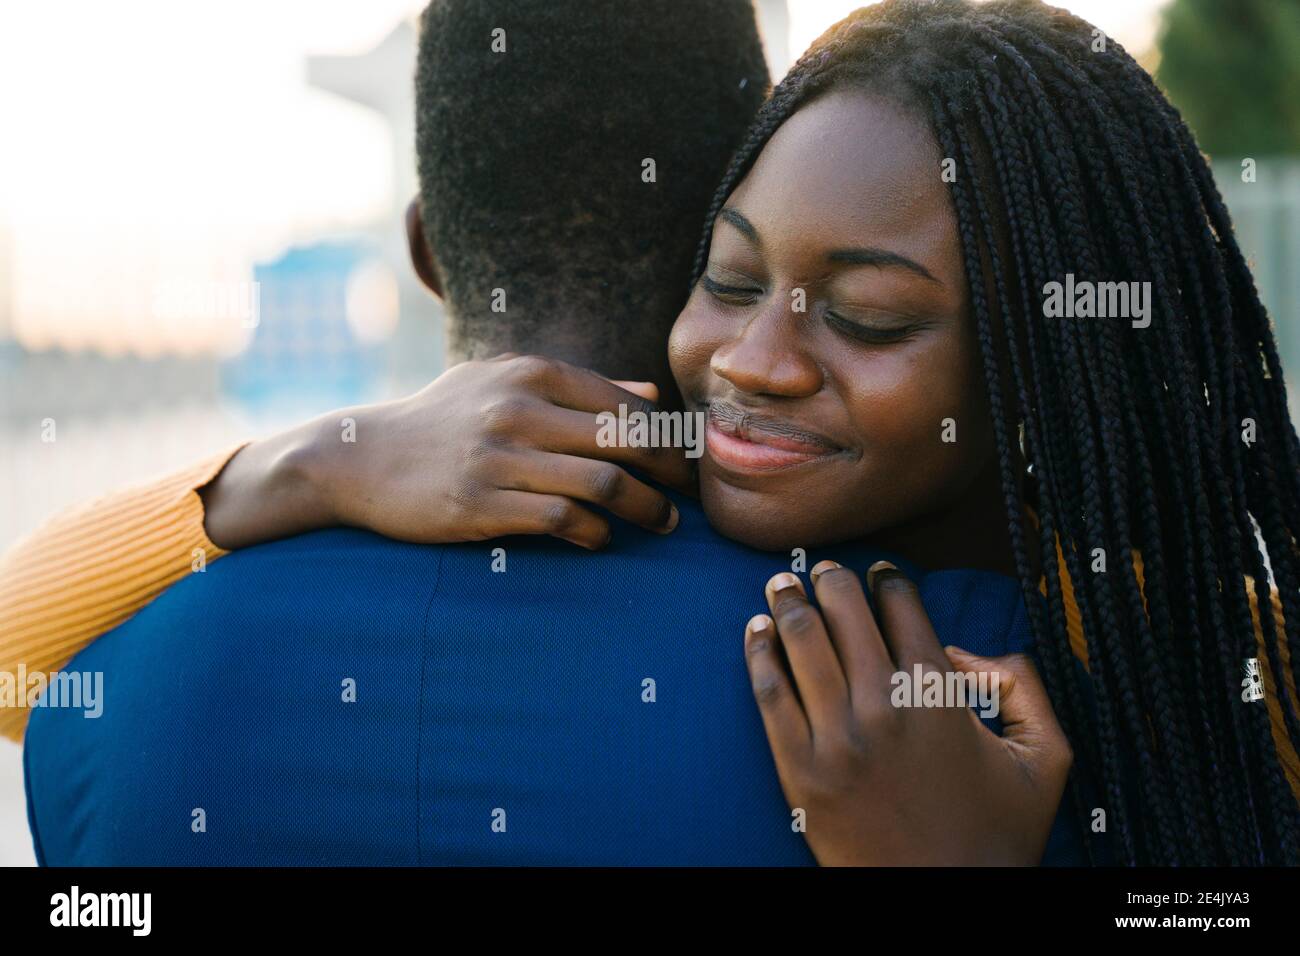 Heterosexual couple embracing each other outdoors Stock Photo